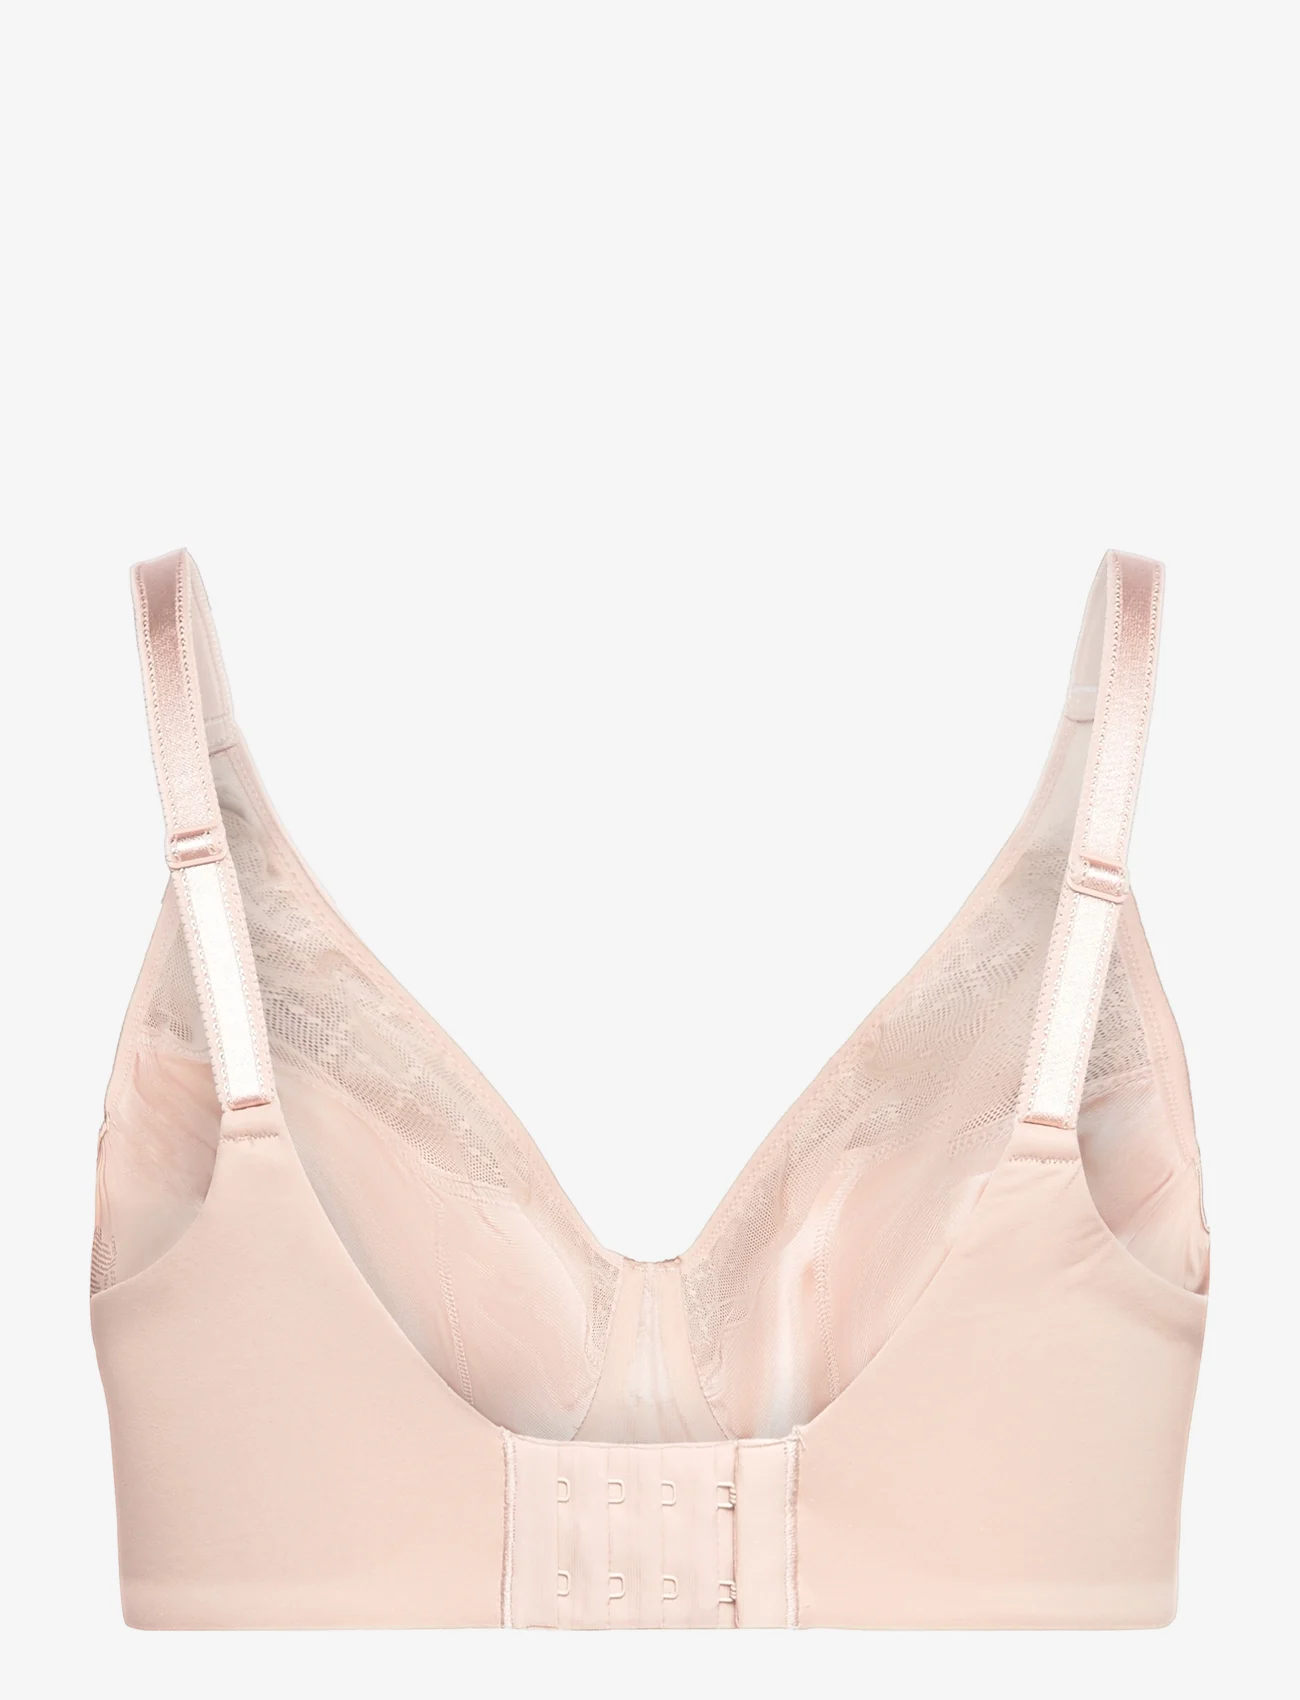 CHANTELLE - Norah Chic Covering Molded Bra - helkupa bh:ar - soft pink - 1